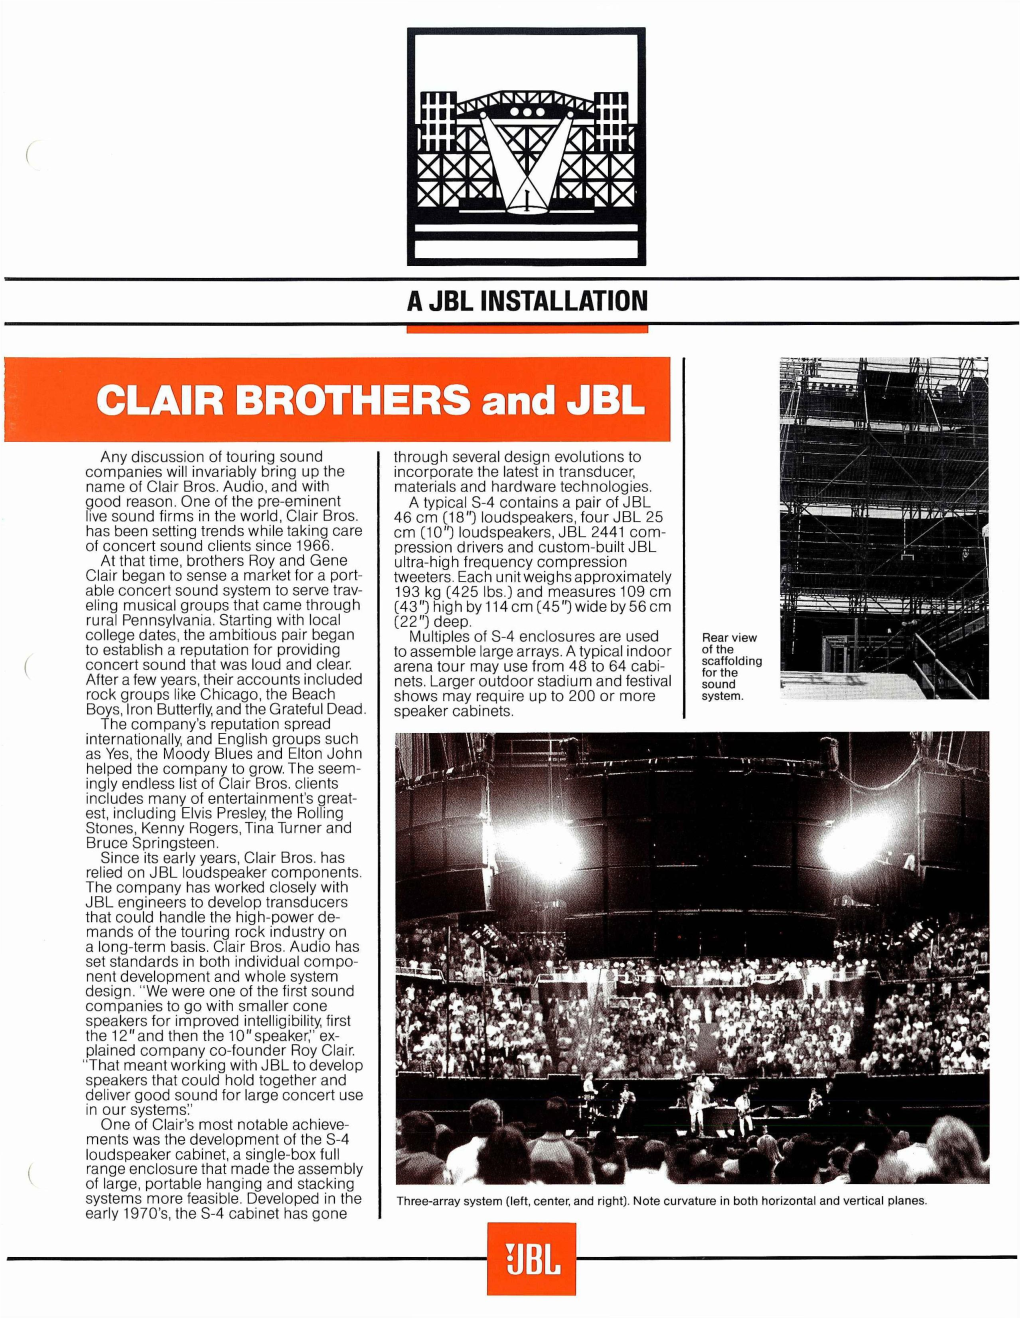 A JBL INSTALLATION CLAIR BROTHERS And